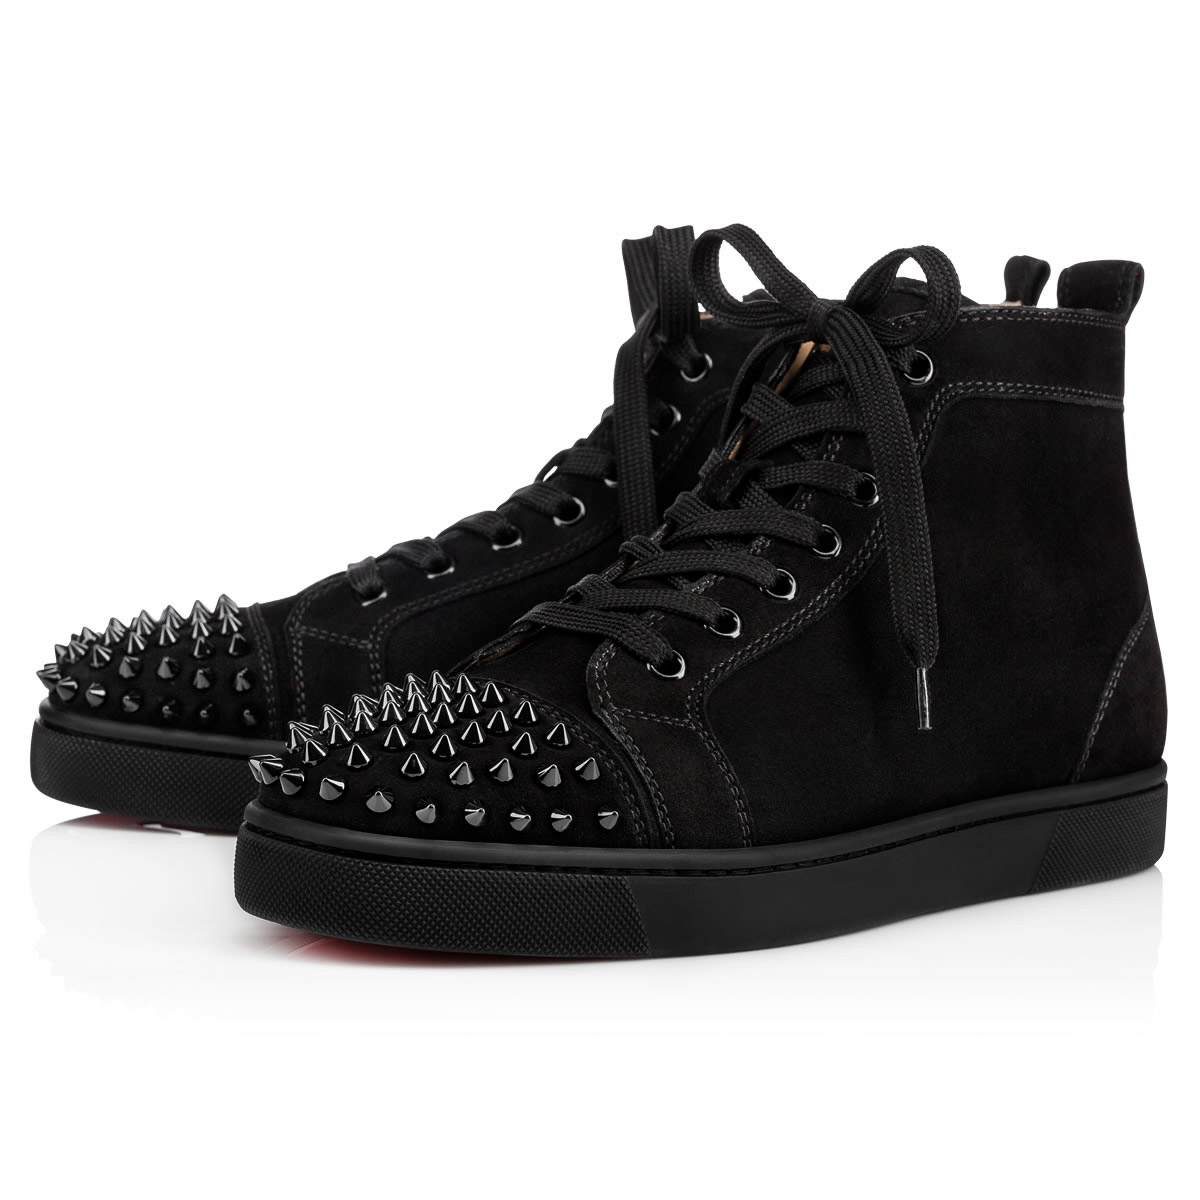 shoes, louboutin, pink, red bottoms, spikes, high top sneakers